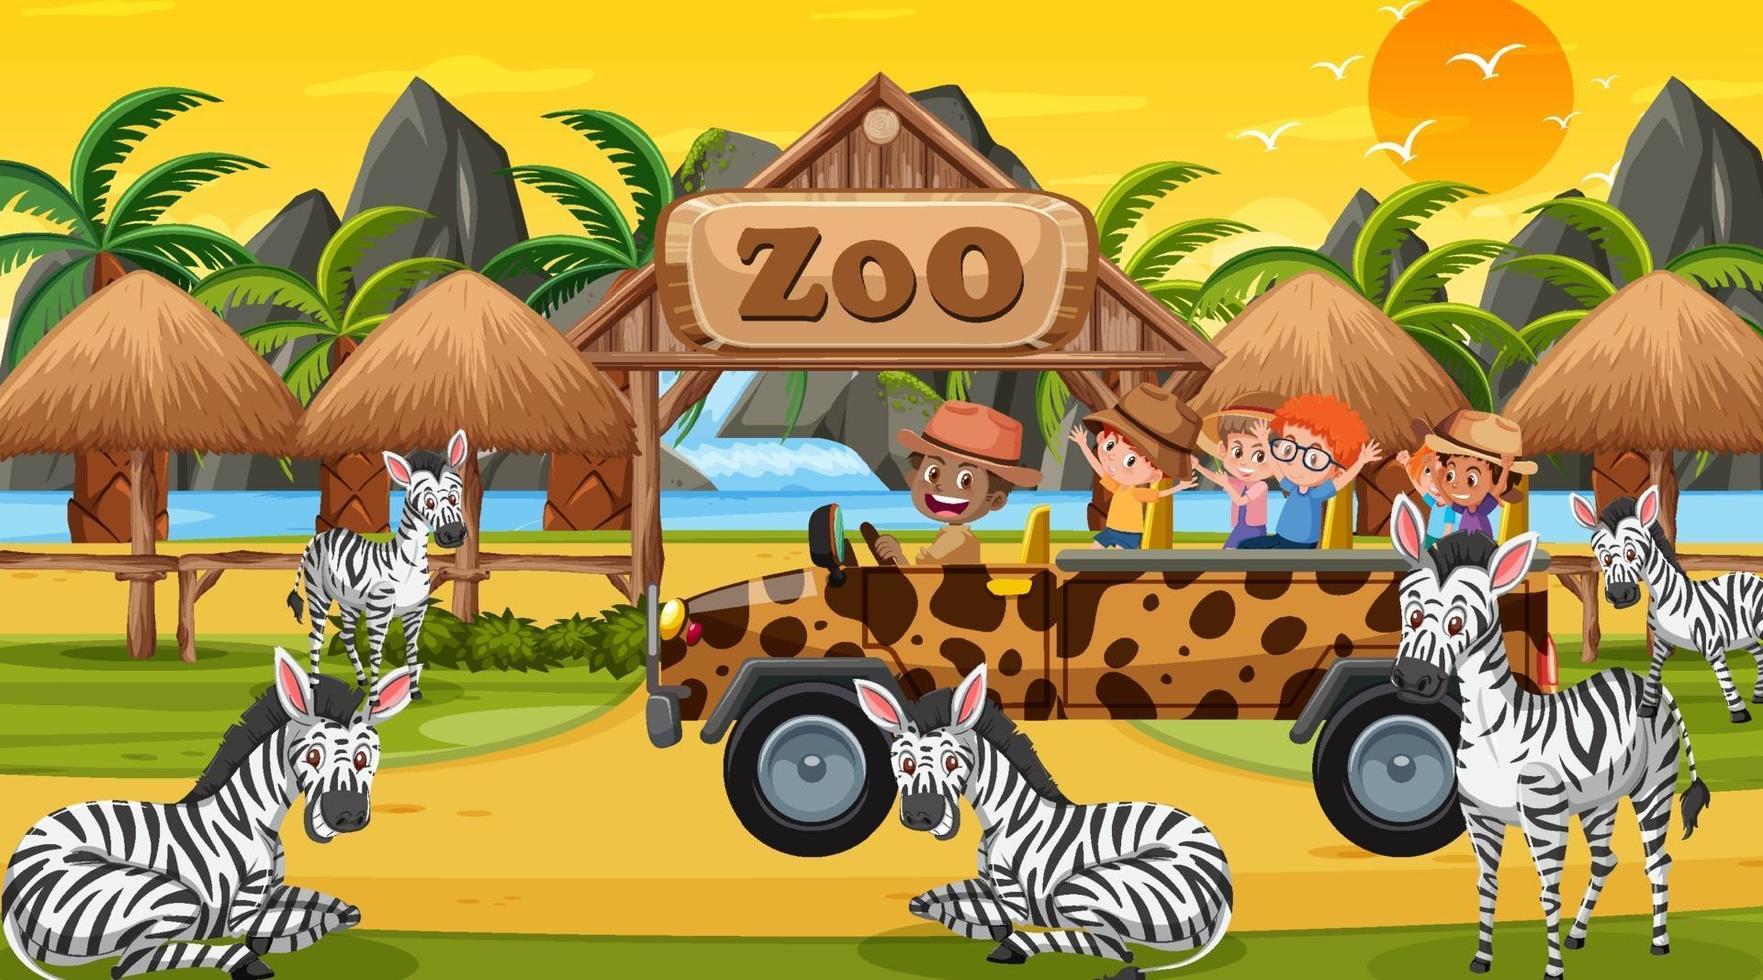 Safari at sunset time scene with children watching zebra group vector